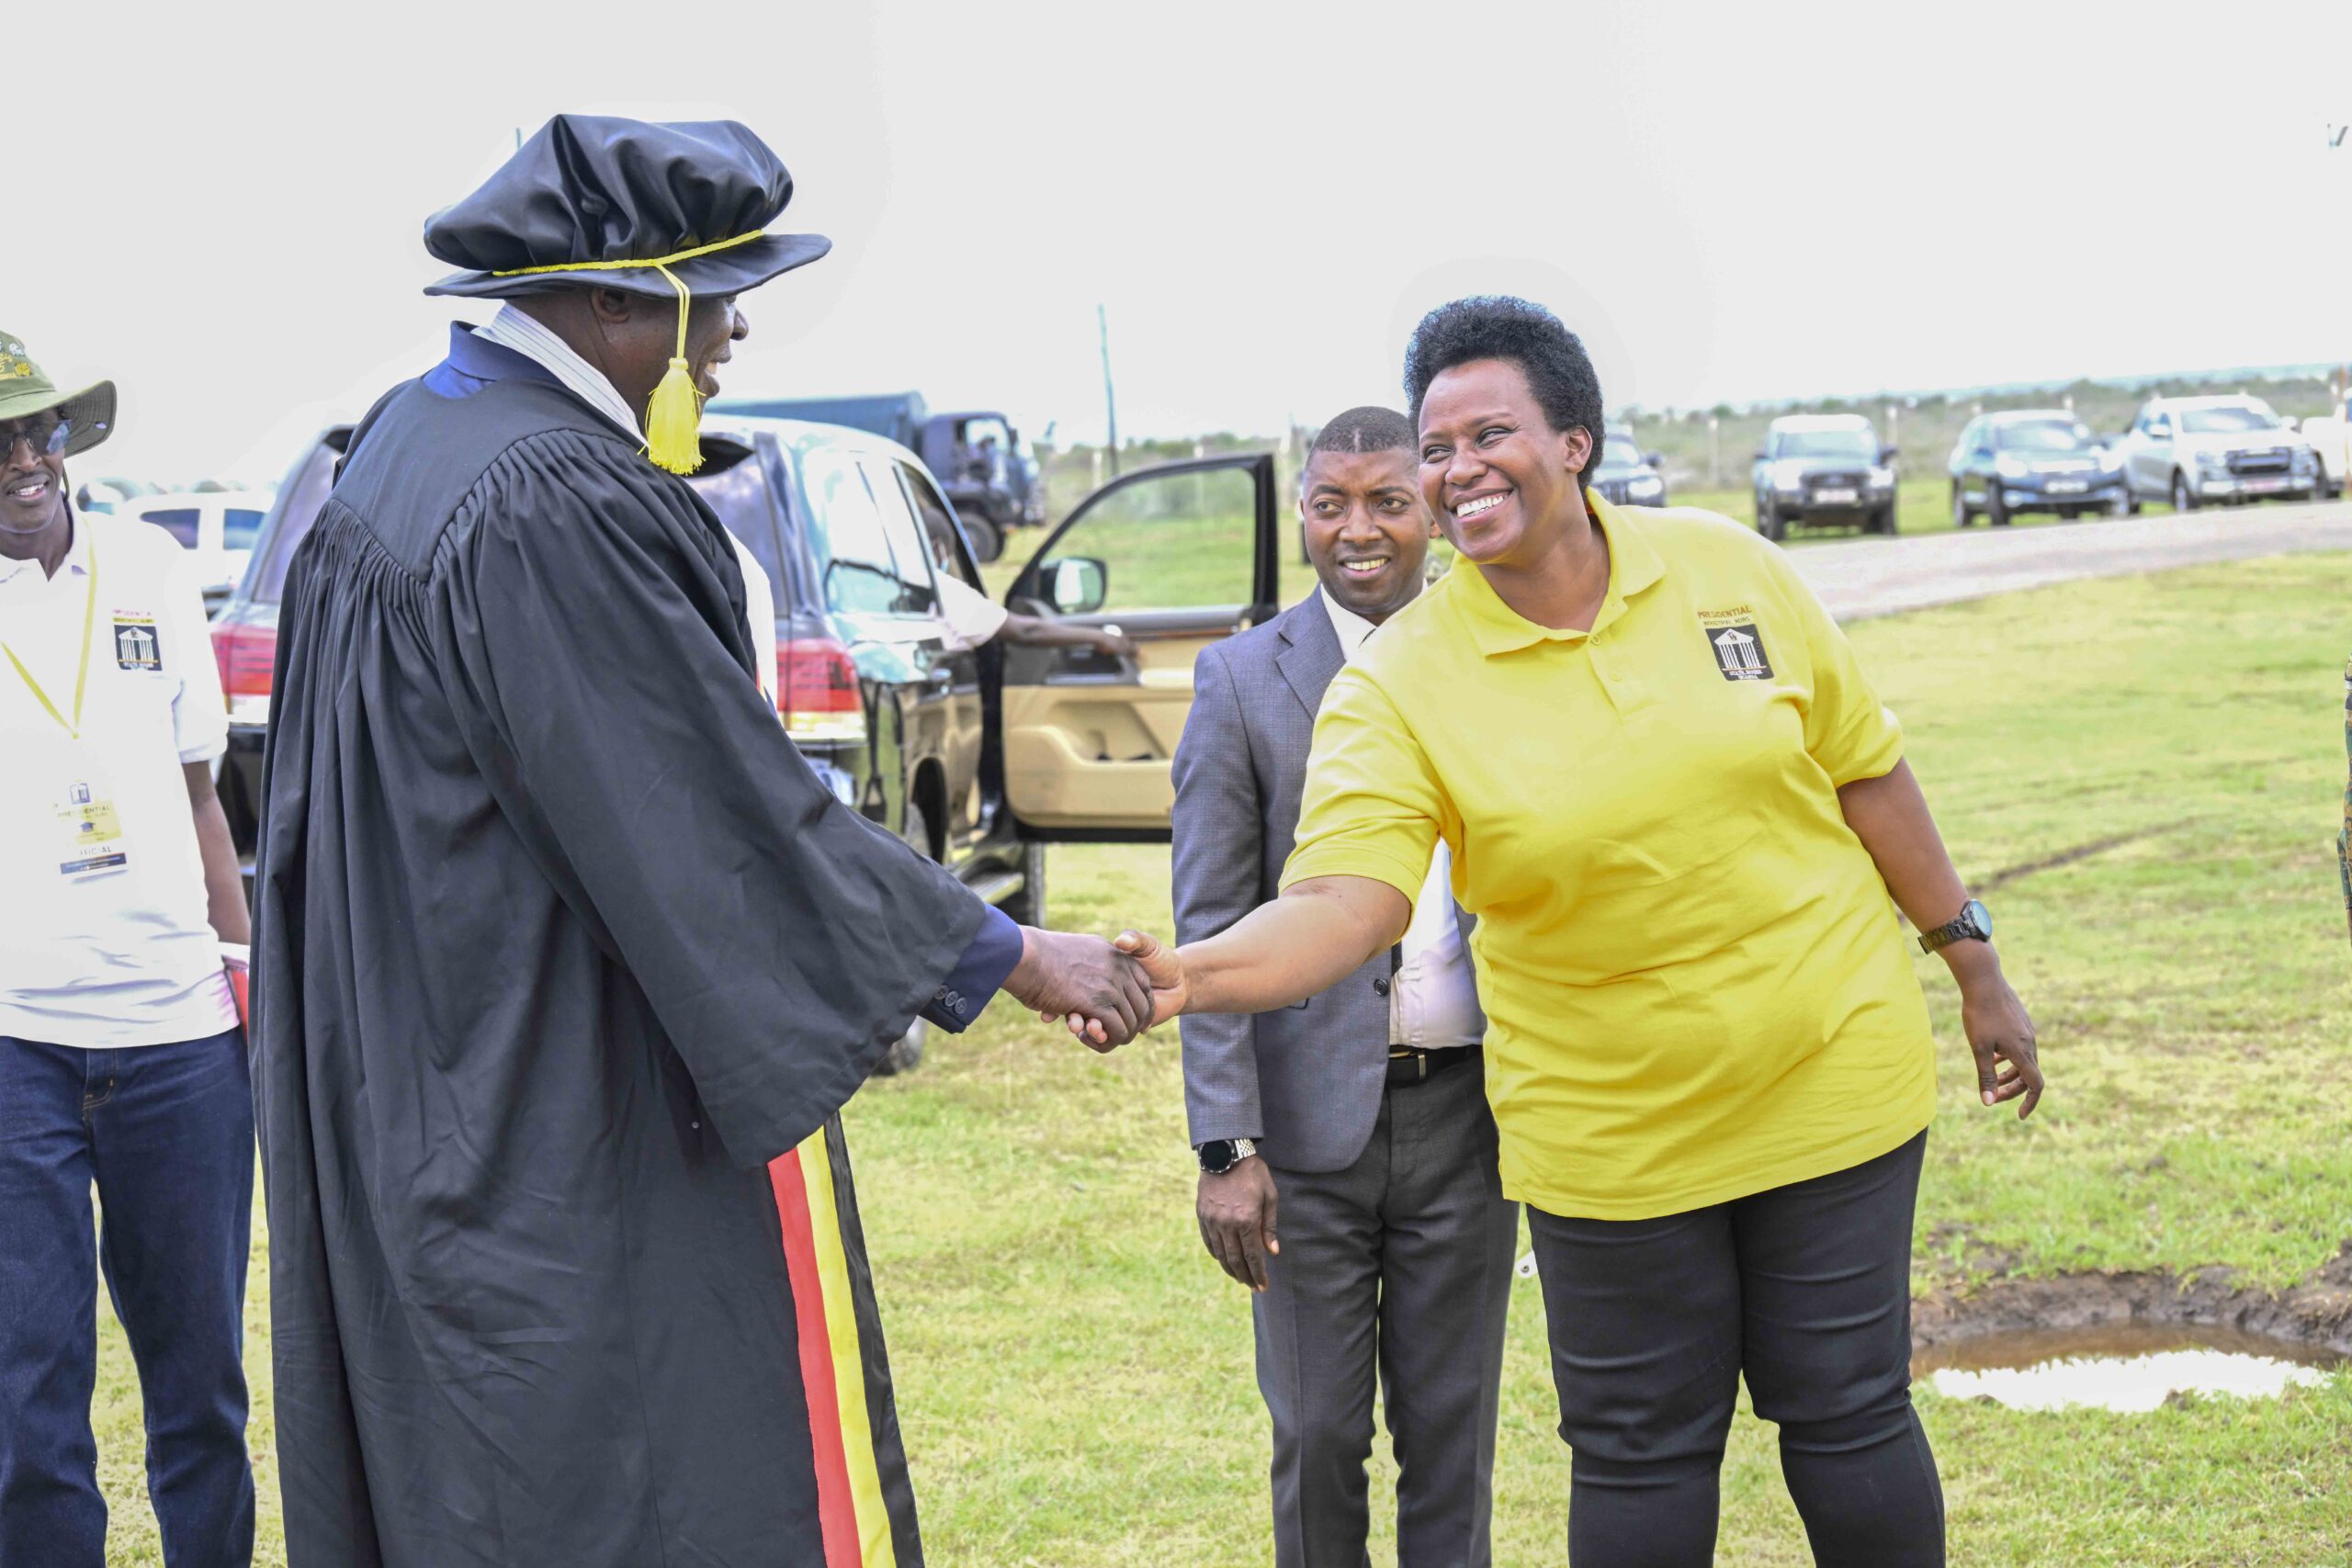 President Museveni commended for fighting unemployment through skilling the youth 